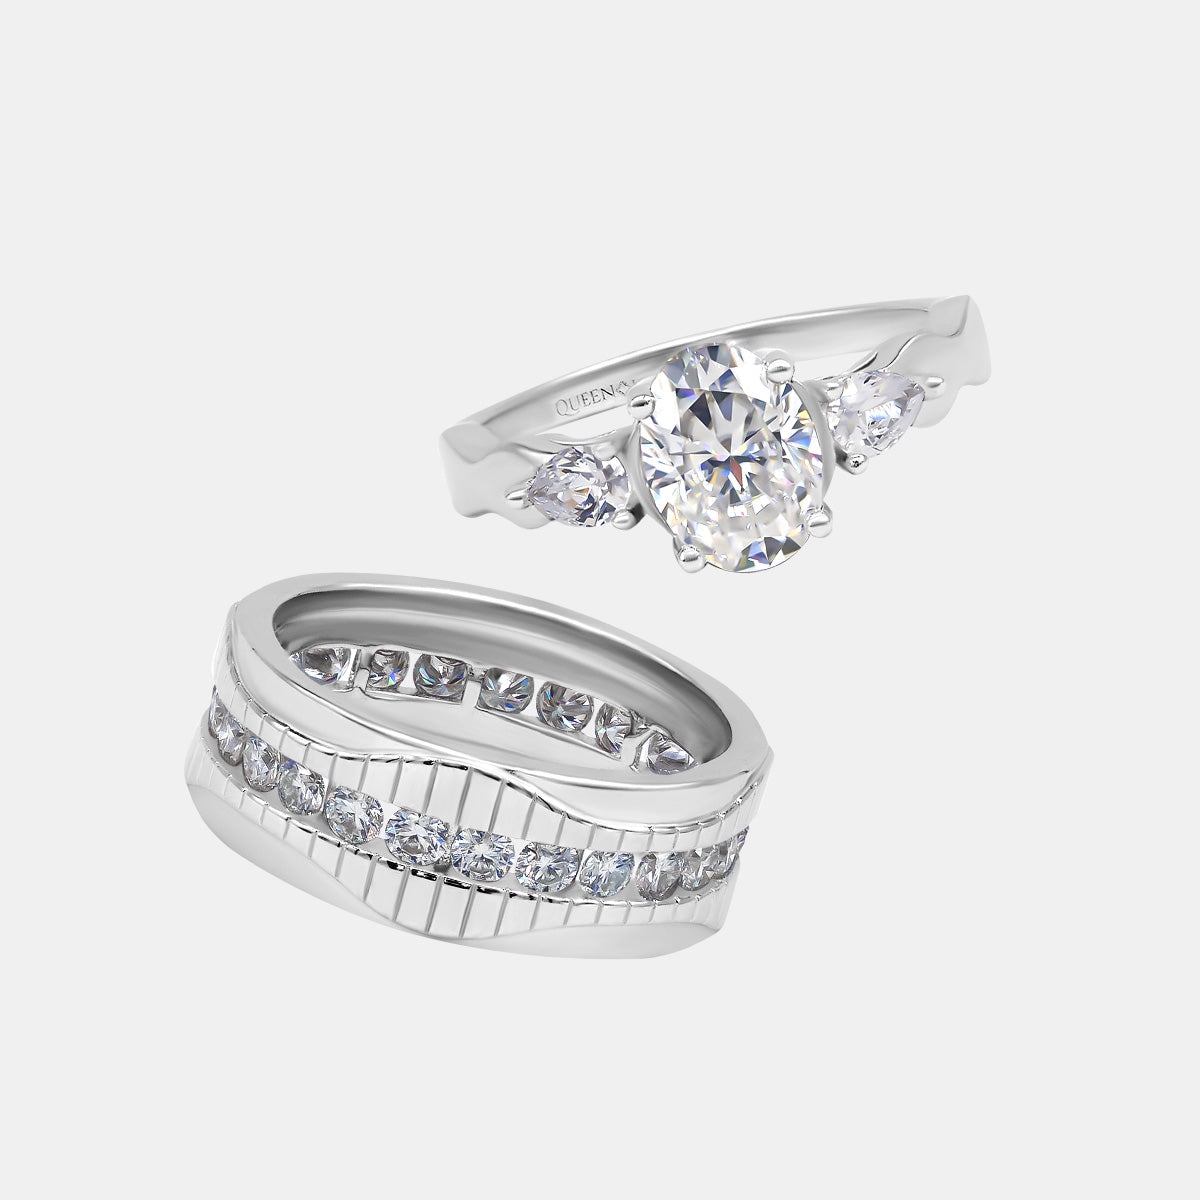 【739】"Entwined" Vintage Art Deco Clear Moissanite Couple Rings